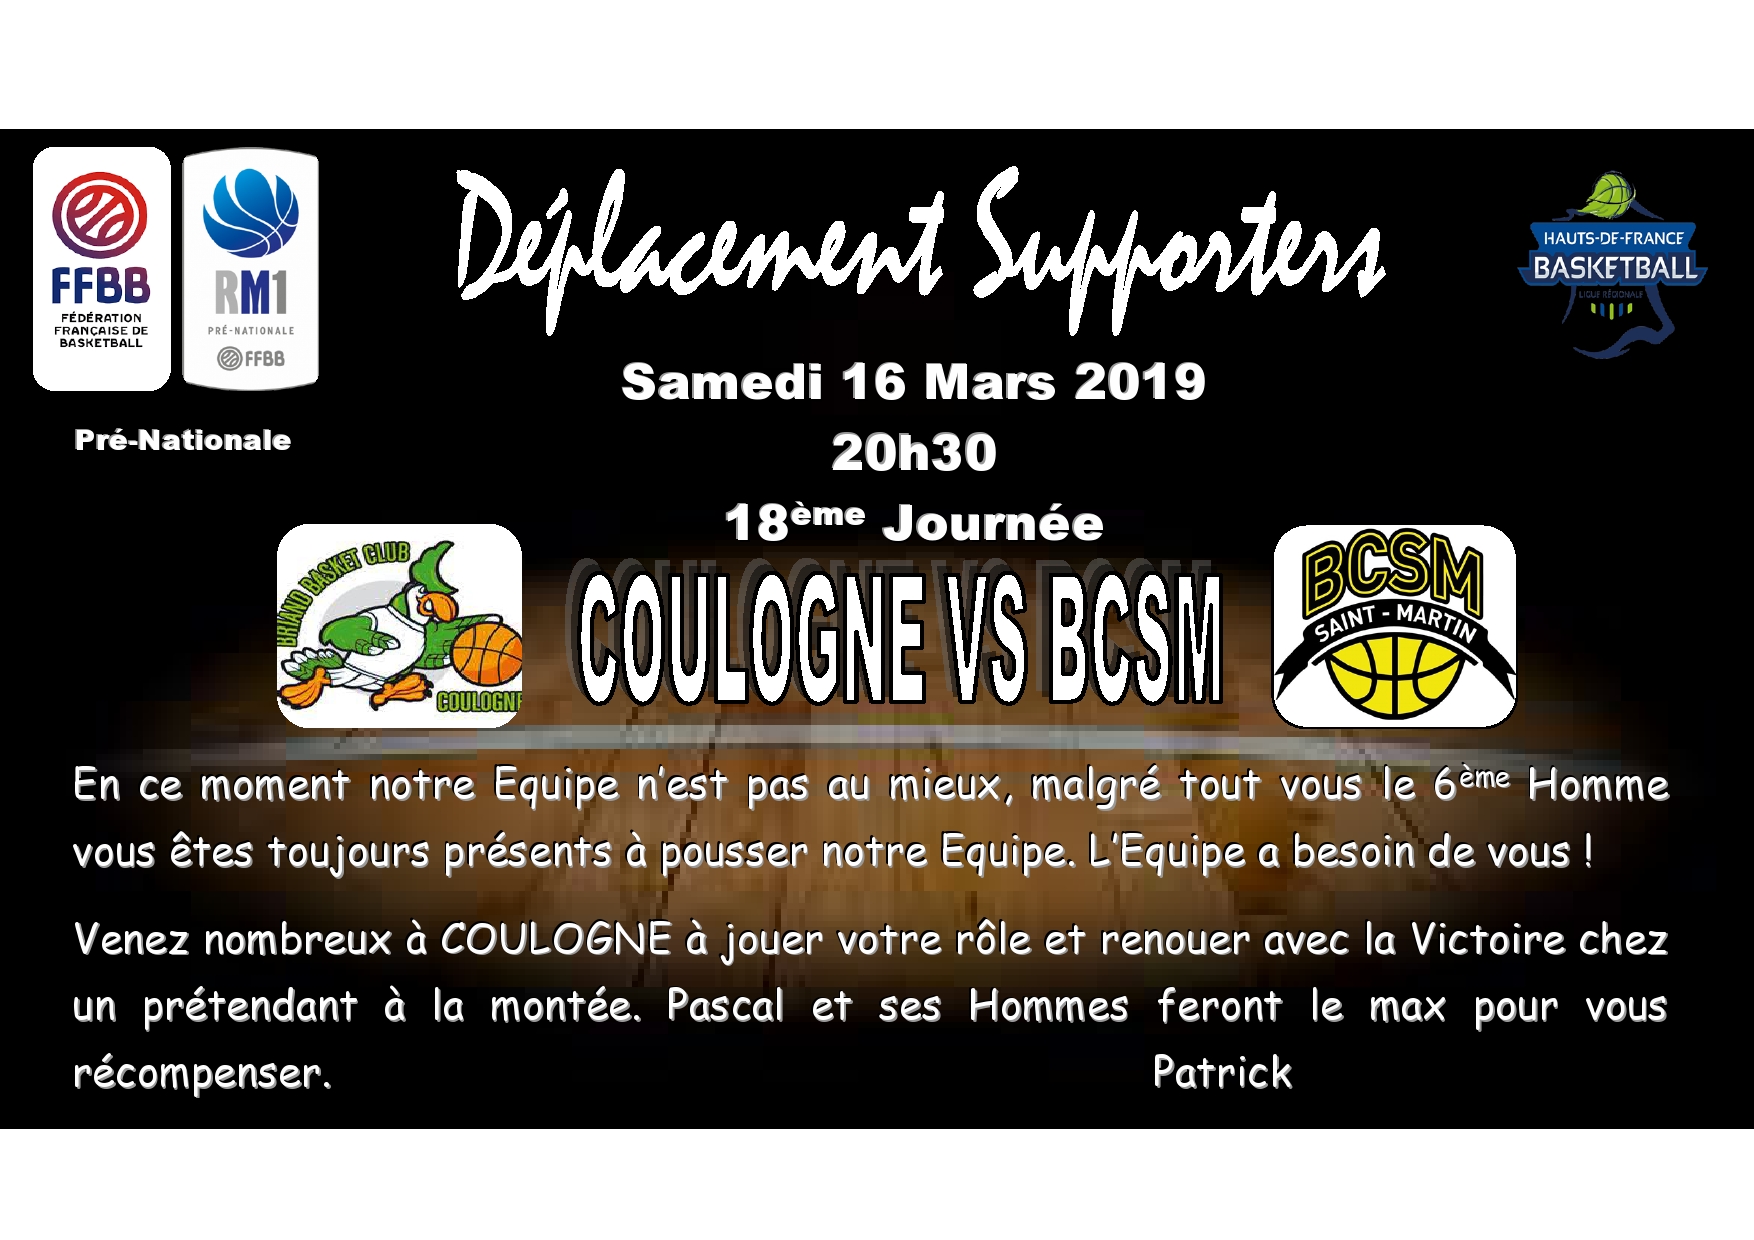 AFFICHE EVENEMENT DEPLACEMENT A COULOGNE 16 MARS 19-page0001.jpg